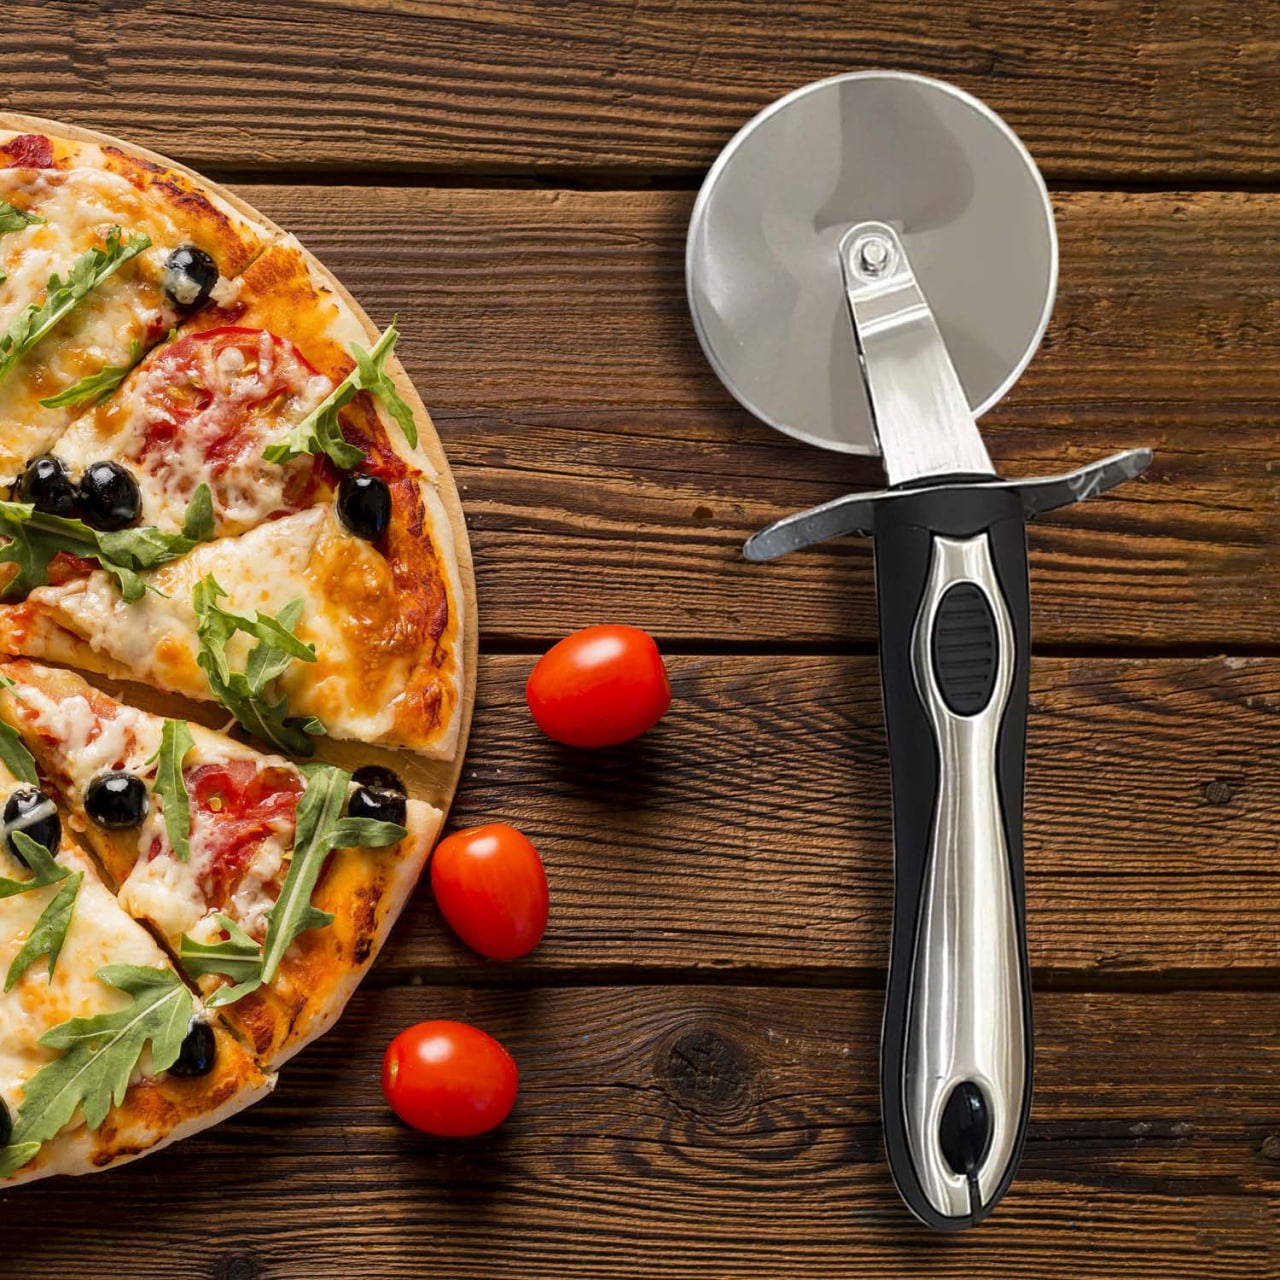 Pizza+Cutter+Wheel+Food+Safe+Stainless+Steel+Pizza+Slicer%2C+Very+Sharp+Pizza+Knife+Pizza+Cutters+with+Non+Slip+Handle+Easy+to+Clean